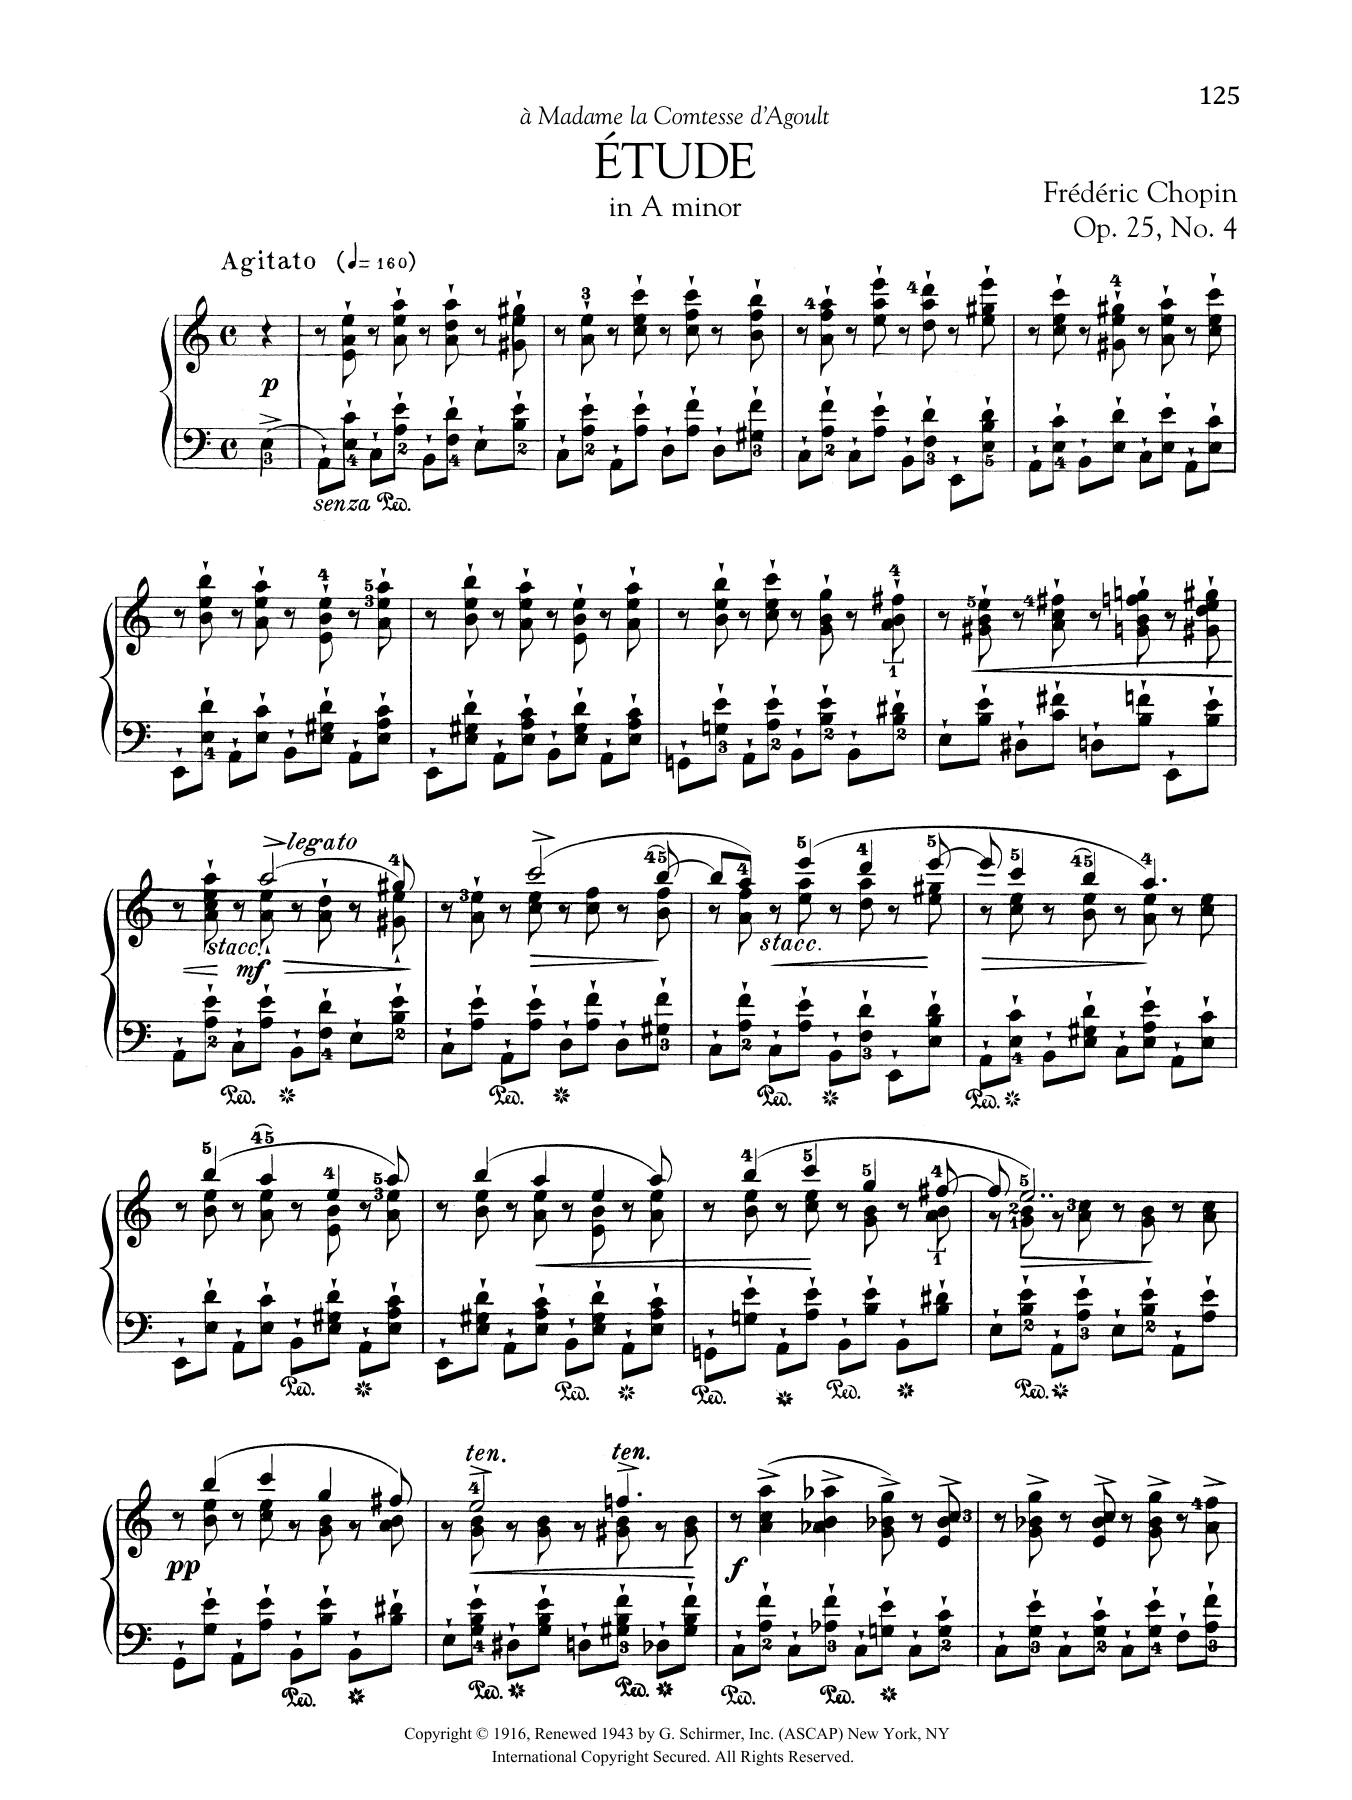 Download Frederic Chopin Etude in A minor, Op. 25, No. 4 Sheet Music